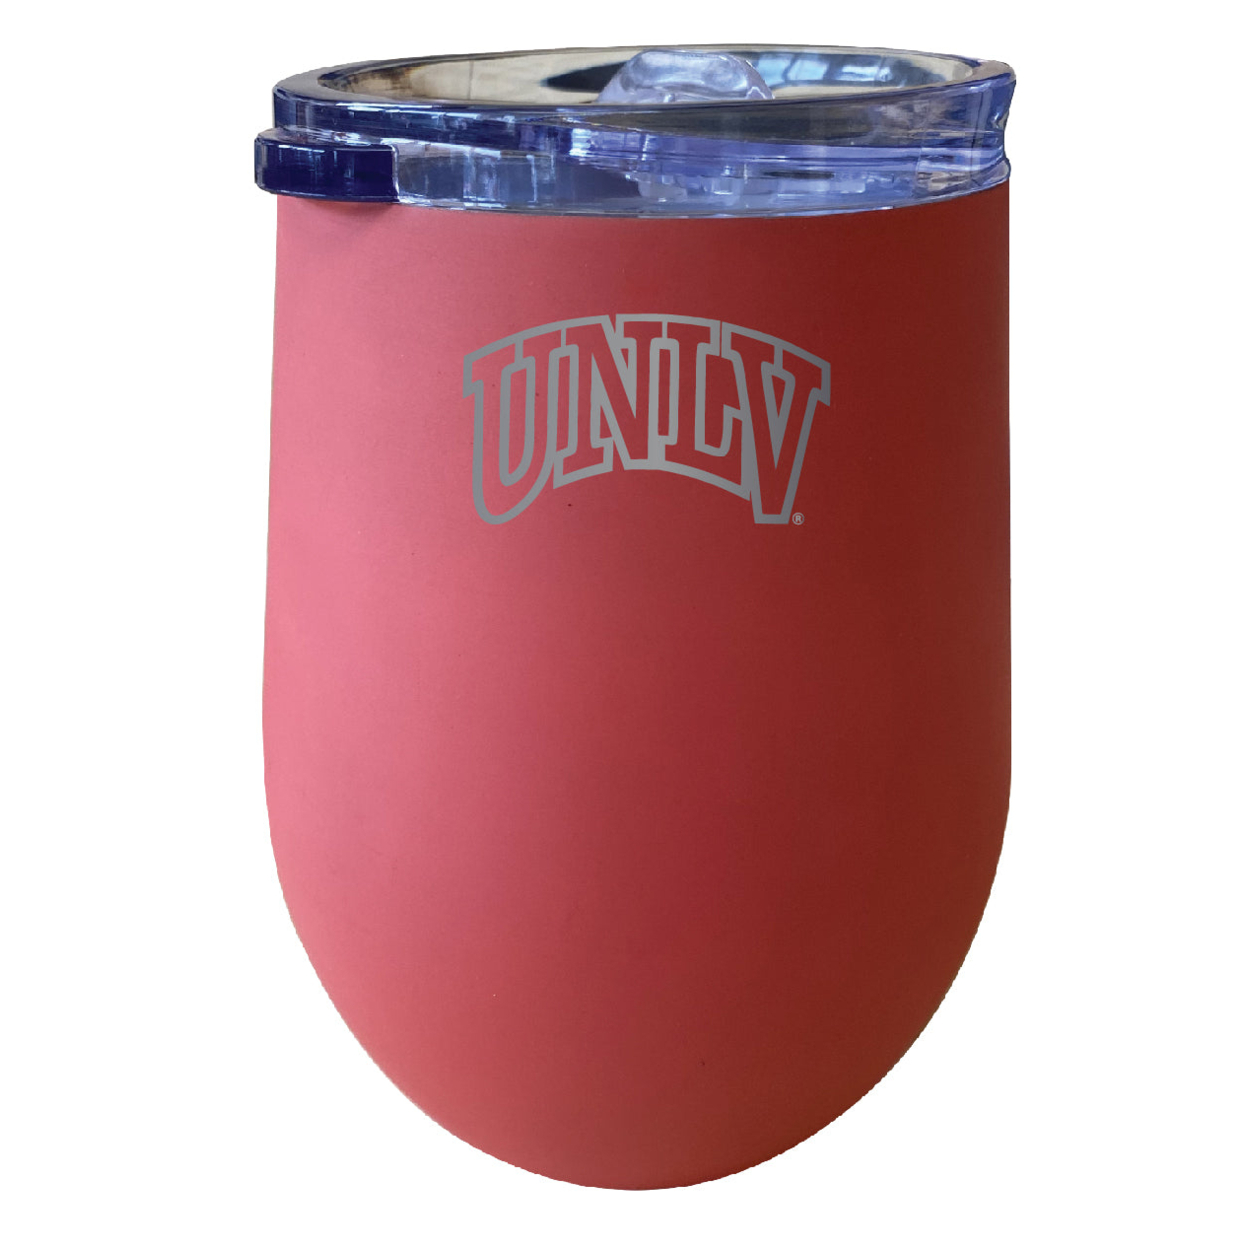 UNLV Rebels 12 Oz Etched Insulated Wine Stainless Steel Tumbler - Choose Your Color - Coral